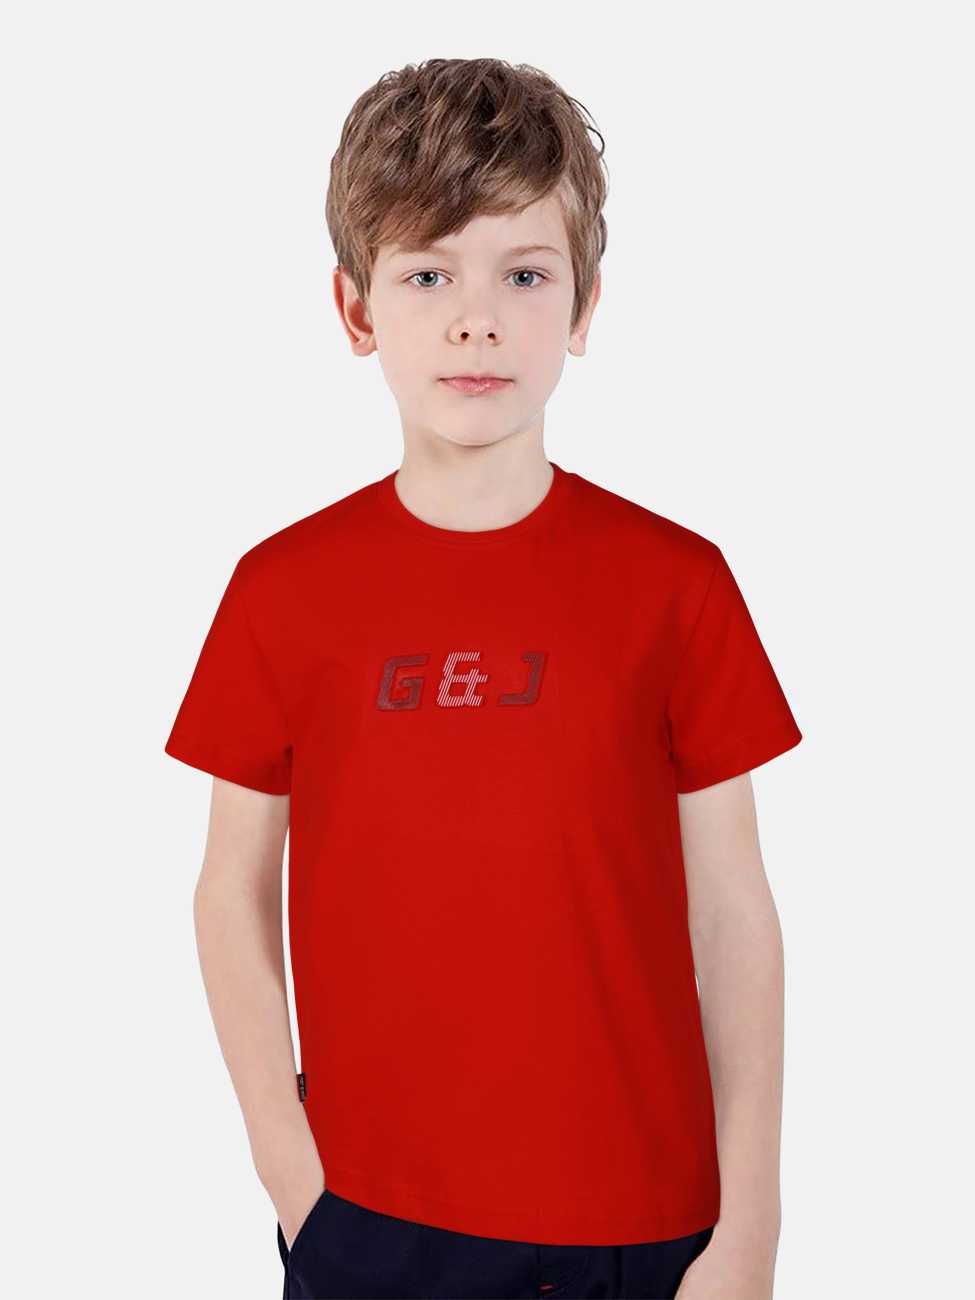 Boys Red Cotton Solid T-Shirt Half Sleeves